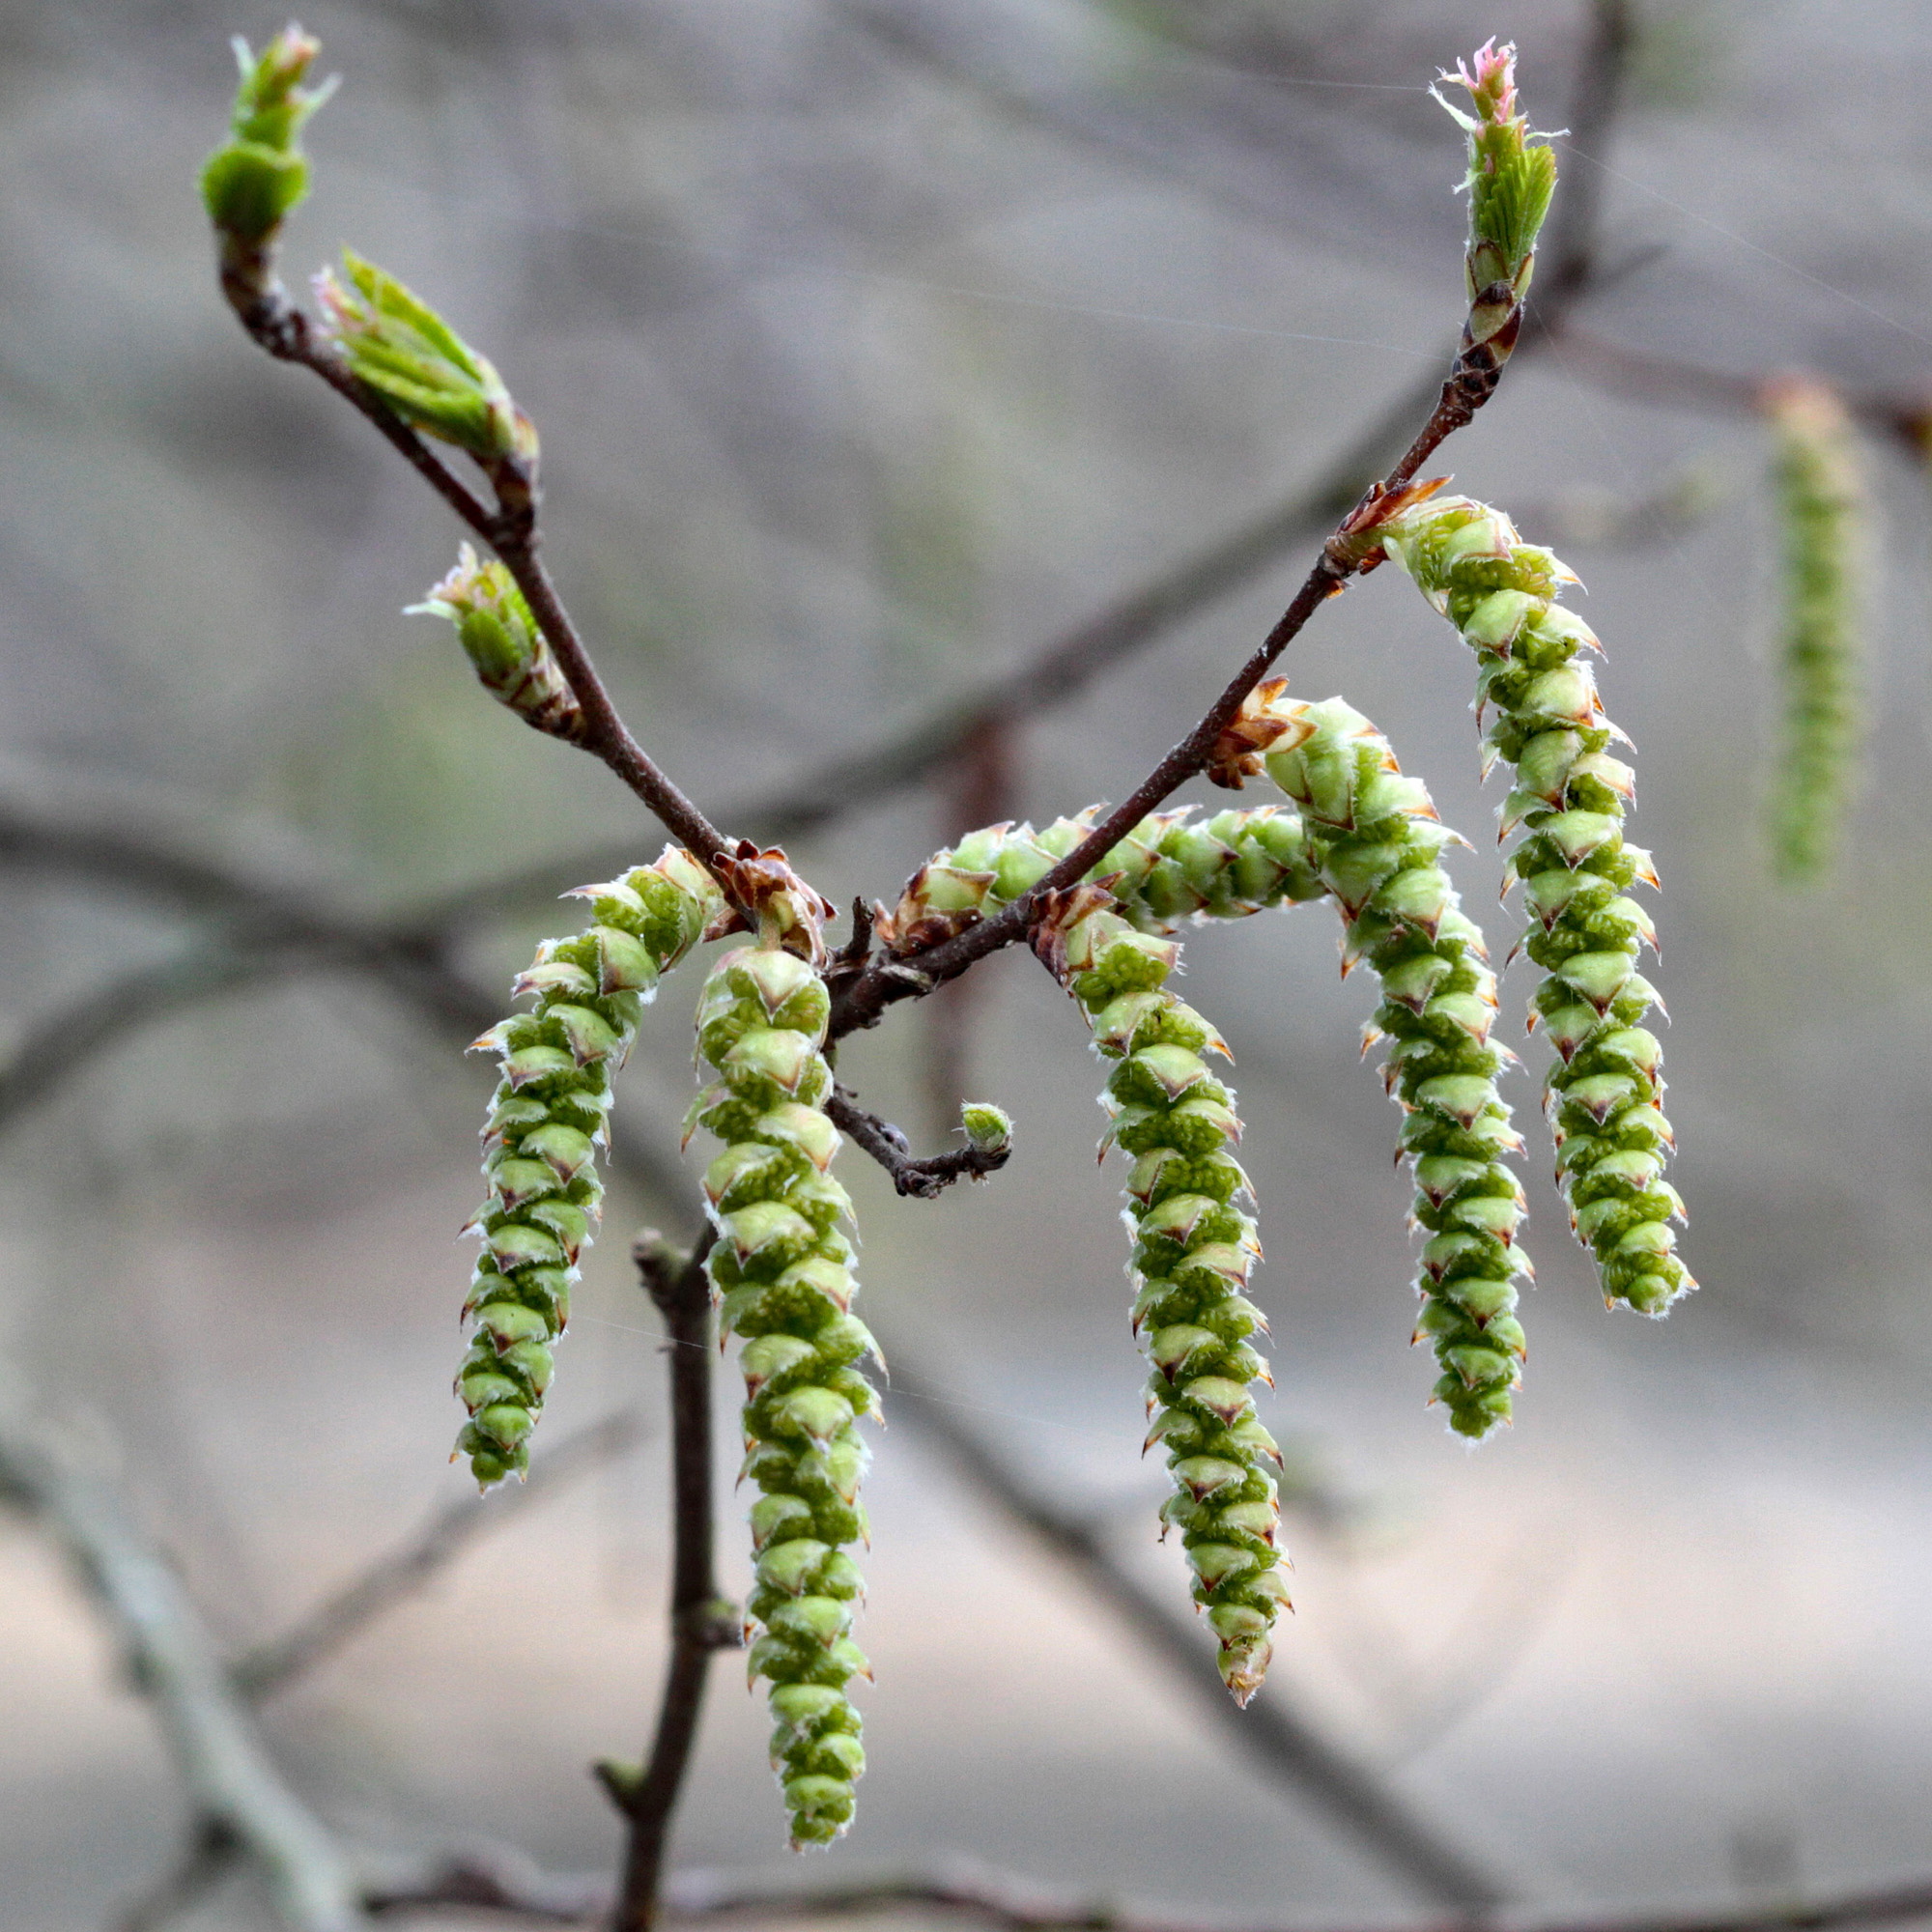 The Scientific Name is Carpinus caroliniana. You will likely hear them called American Hornbeam, Ironwood, Musclewood, Blue Beech. This picture shows the Male catkins emerge in mid-March before the tree leafs out. of Carpinus caroliniana